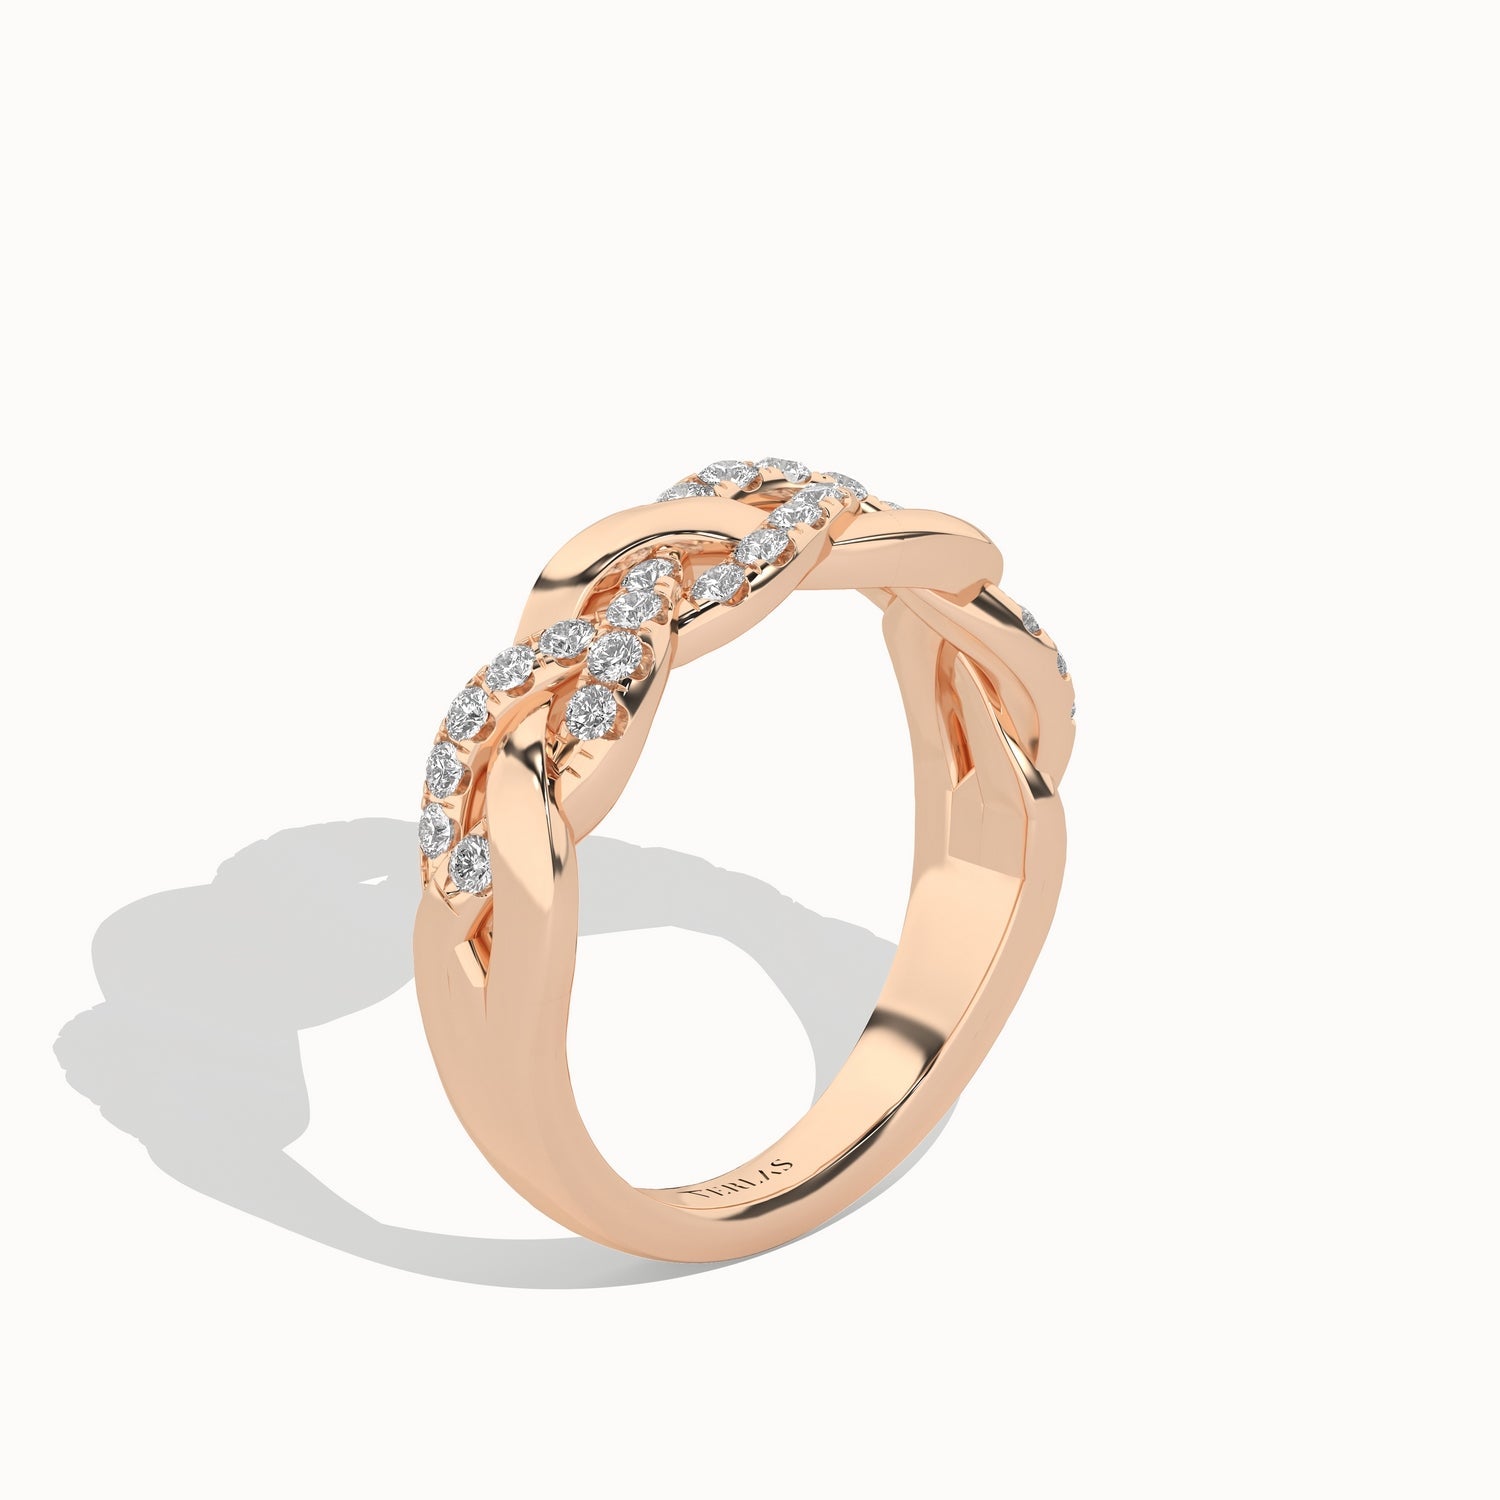 Triple Entwined Braid Ring_Product Angle_1/3Ct - 2